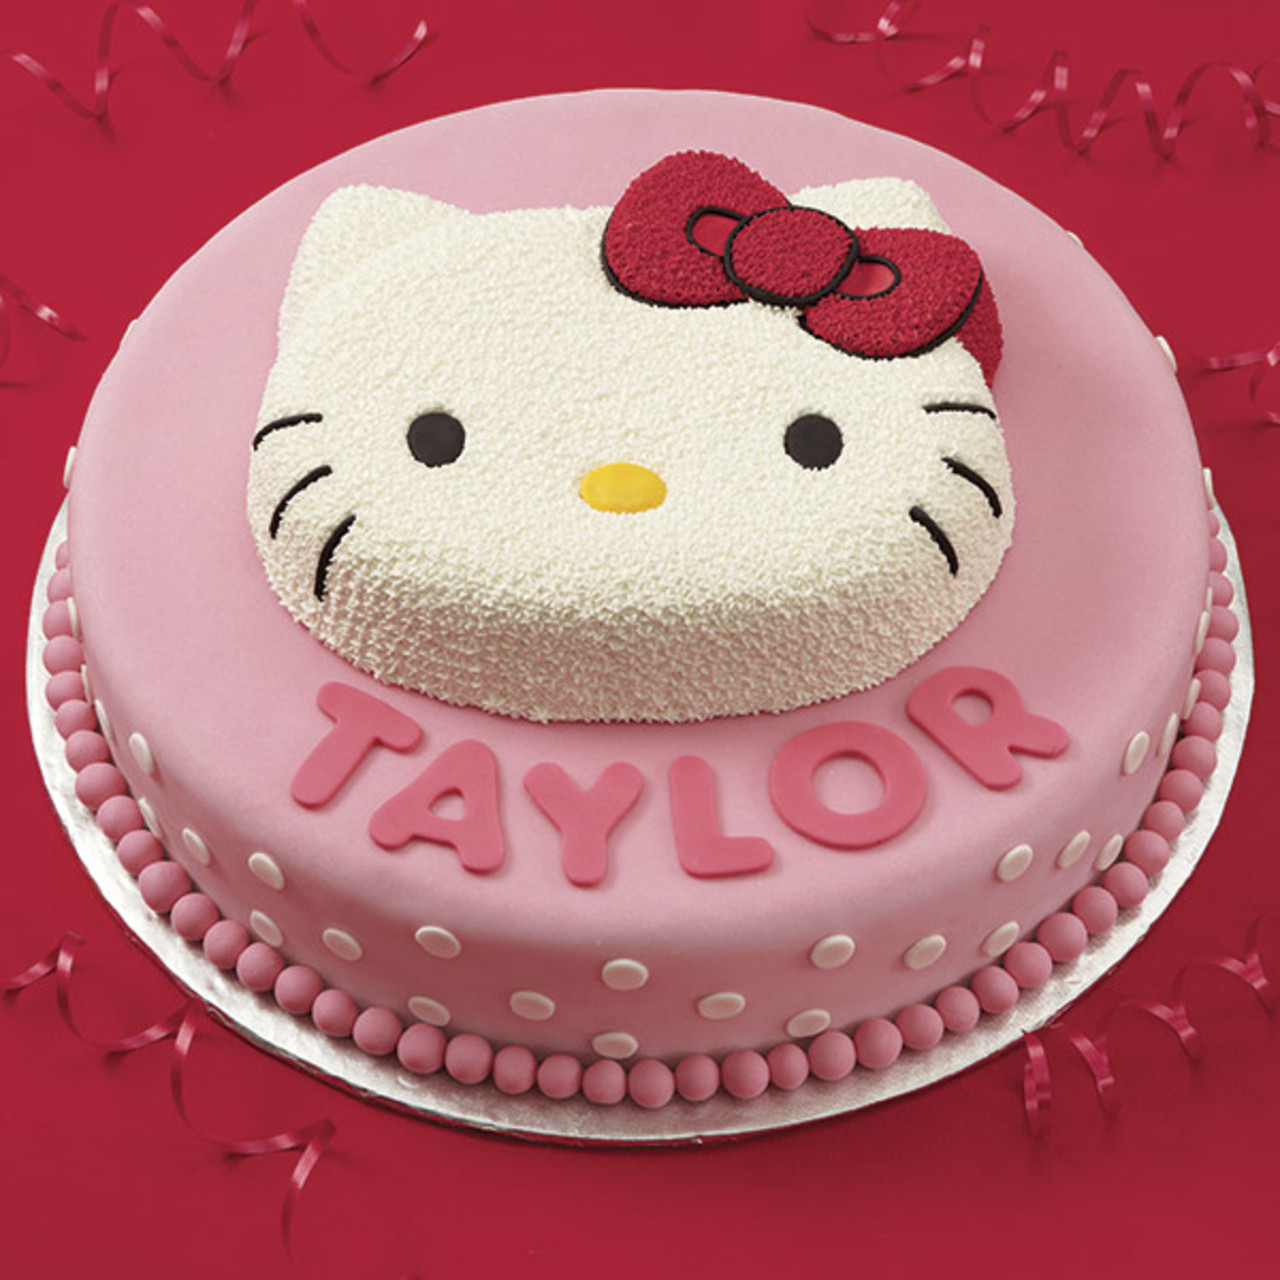 Cute and Simple Hello Kitty Cake - CakeinaCup by Ana | Facebook